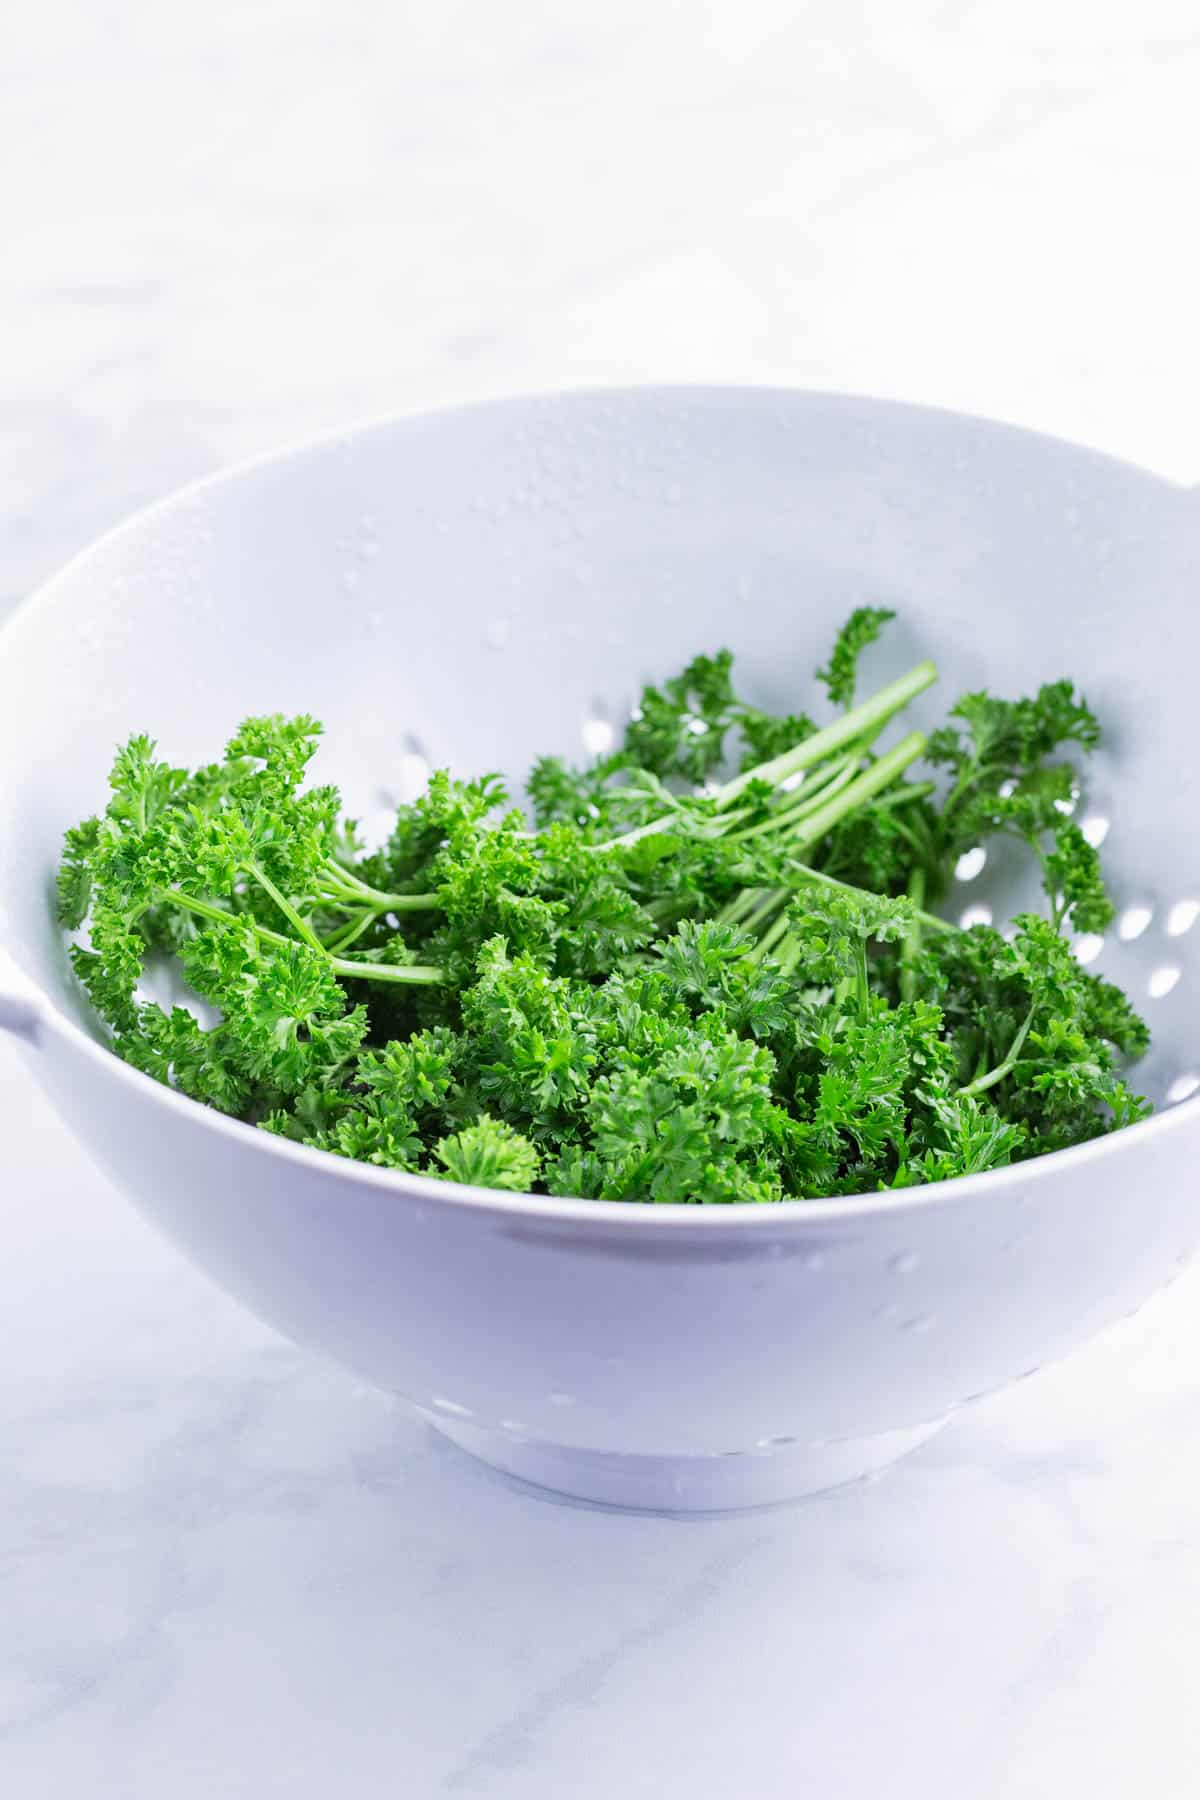 Parsley is washed in a colander.